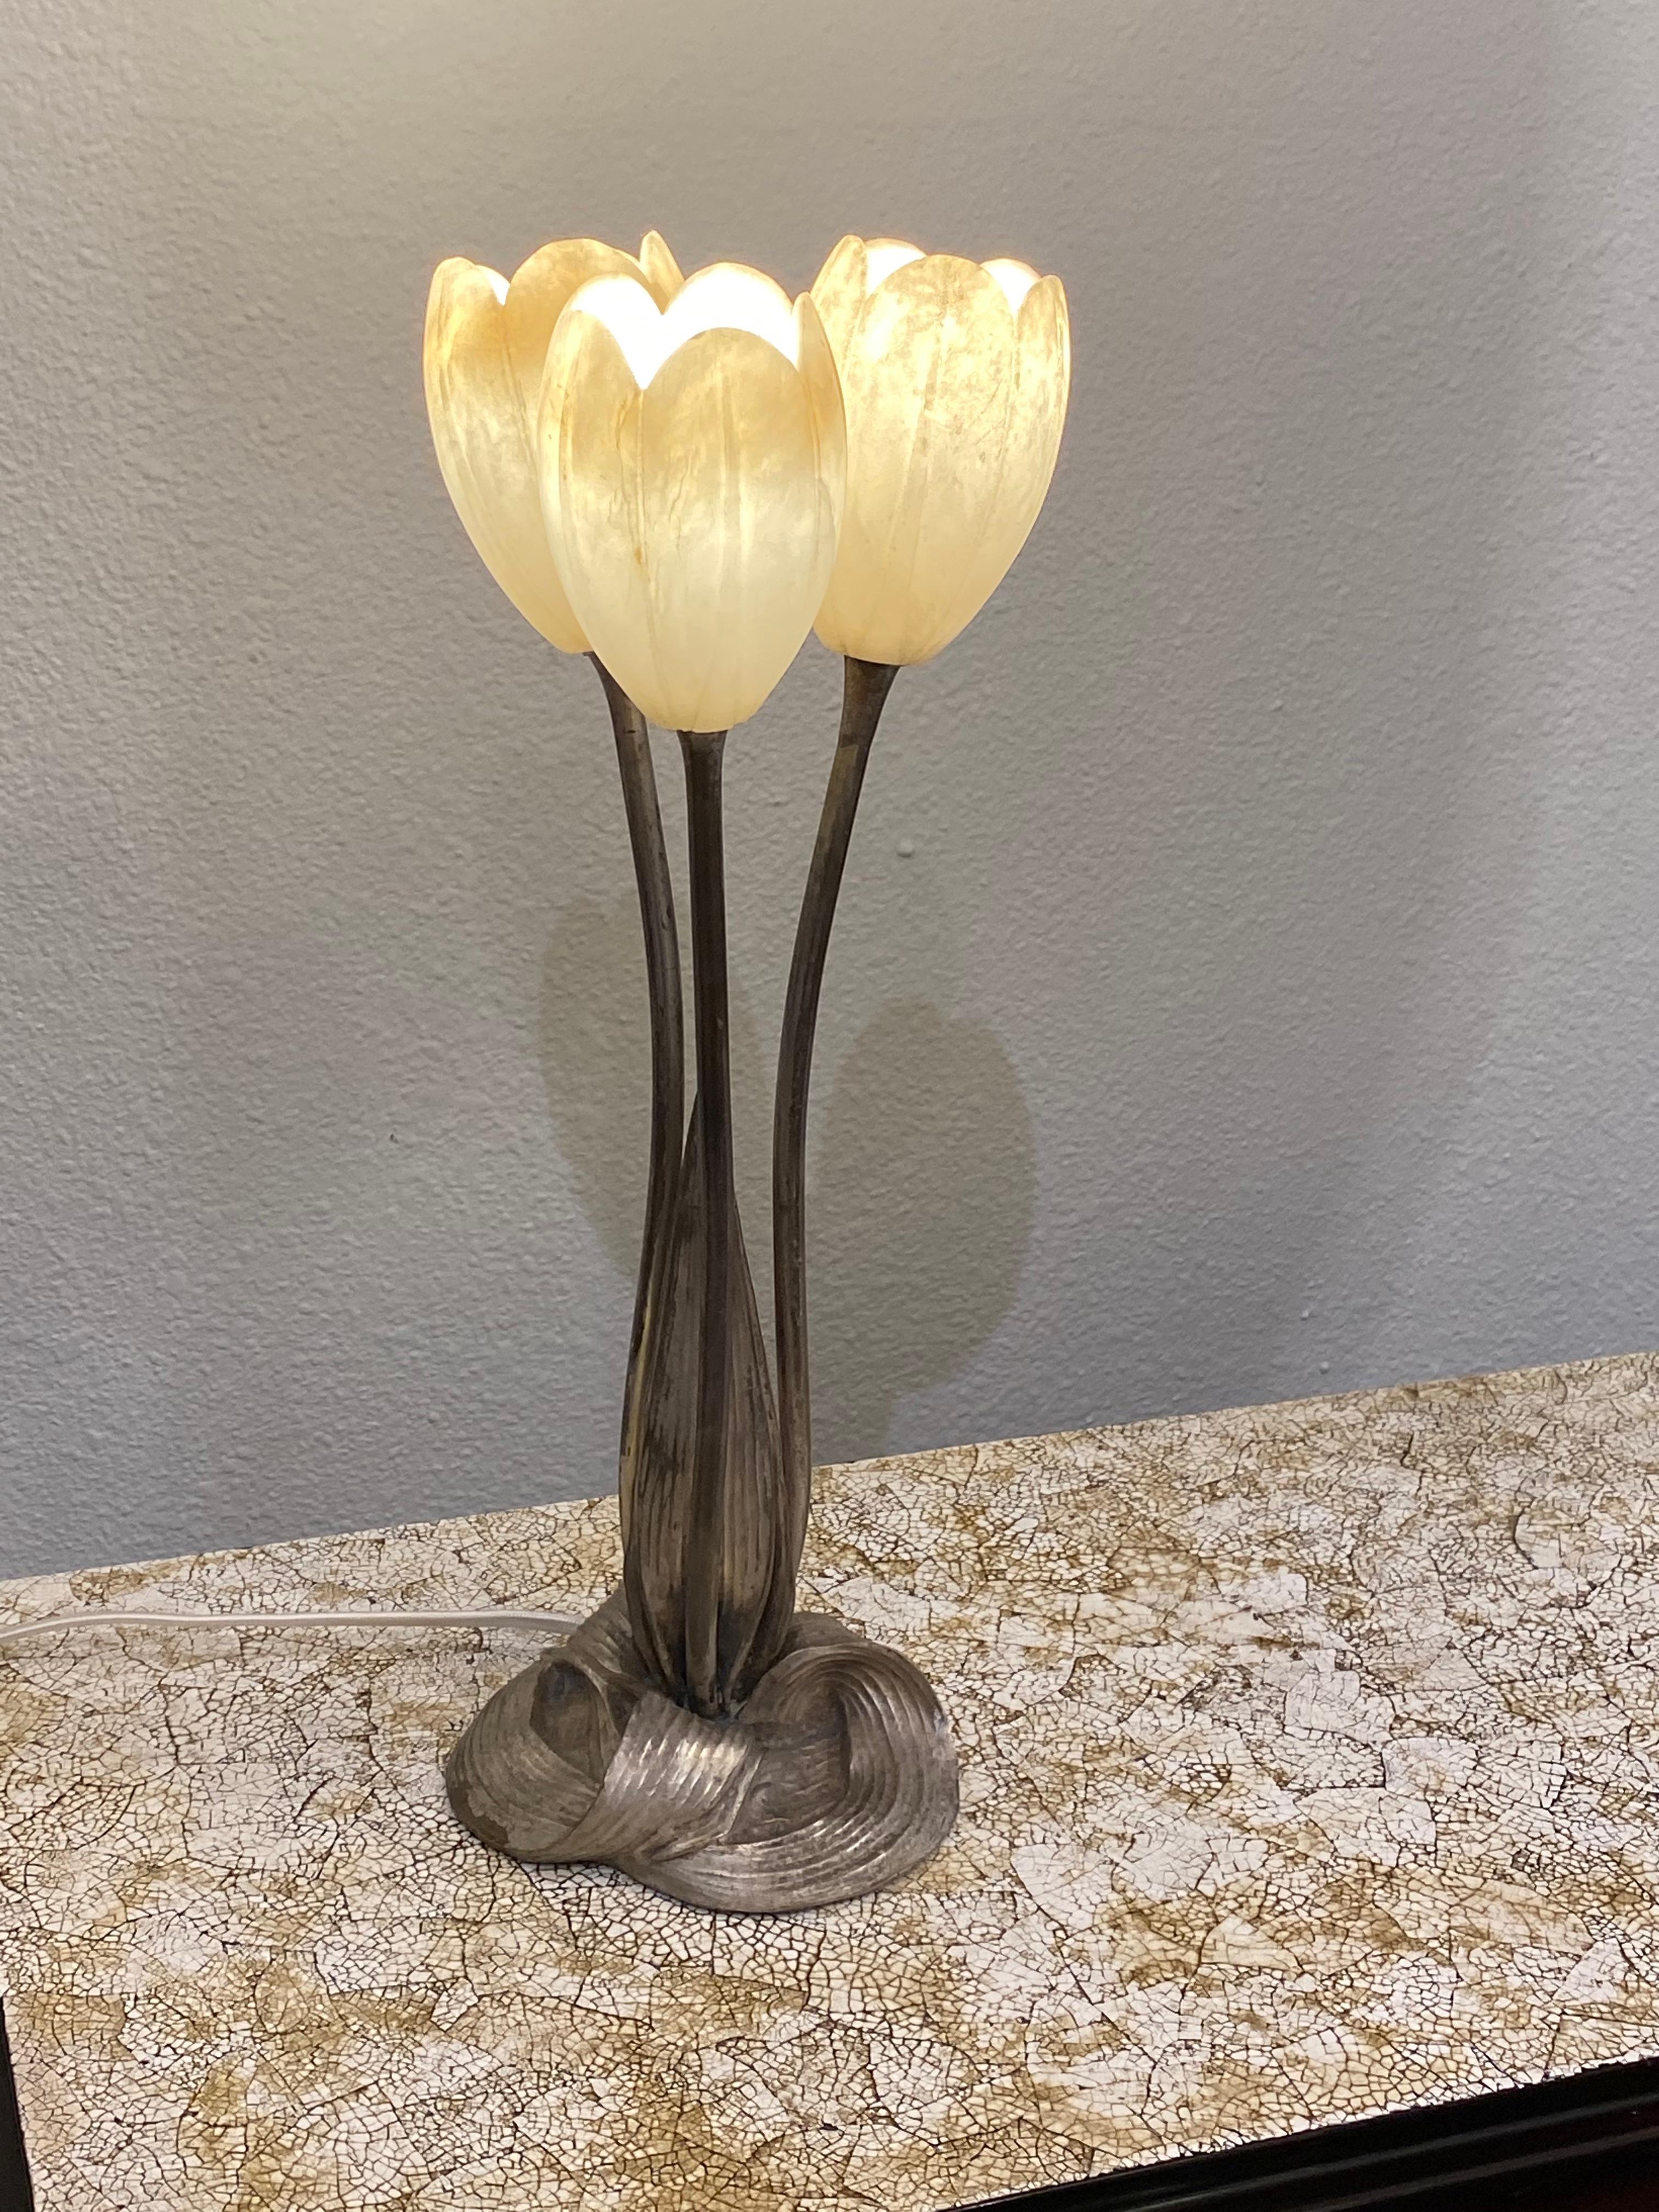 A rare and unique Art Deco table lamp by Albert Cheuret, depicting three tulips flowers made of cast silvered bronze and carved alabaster shades.
Made in France.
circa 1925
Signature: Albert Cheuret.

Albert Cheuret was born in 1884 in Paris.